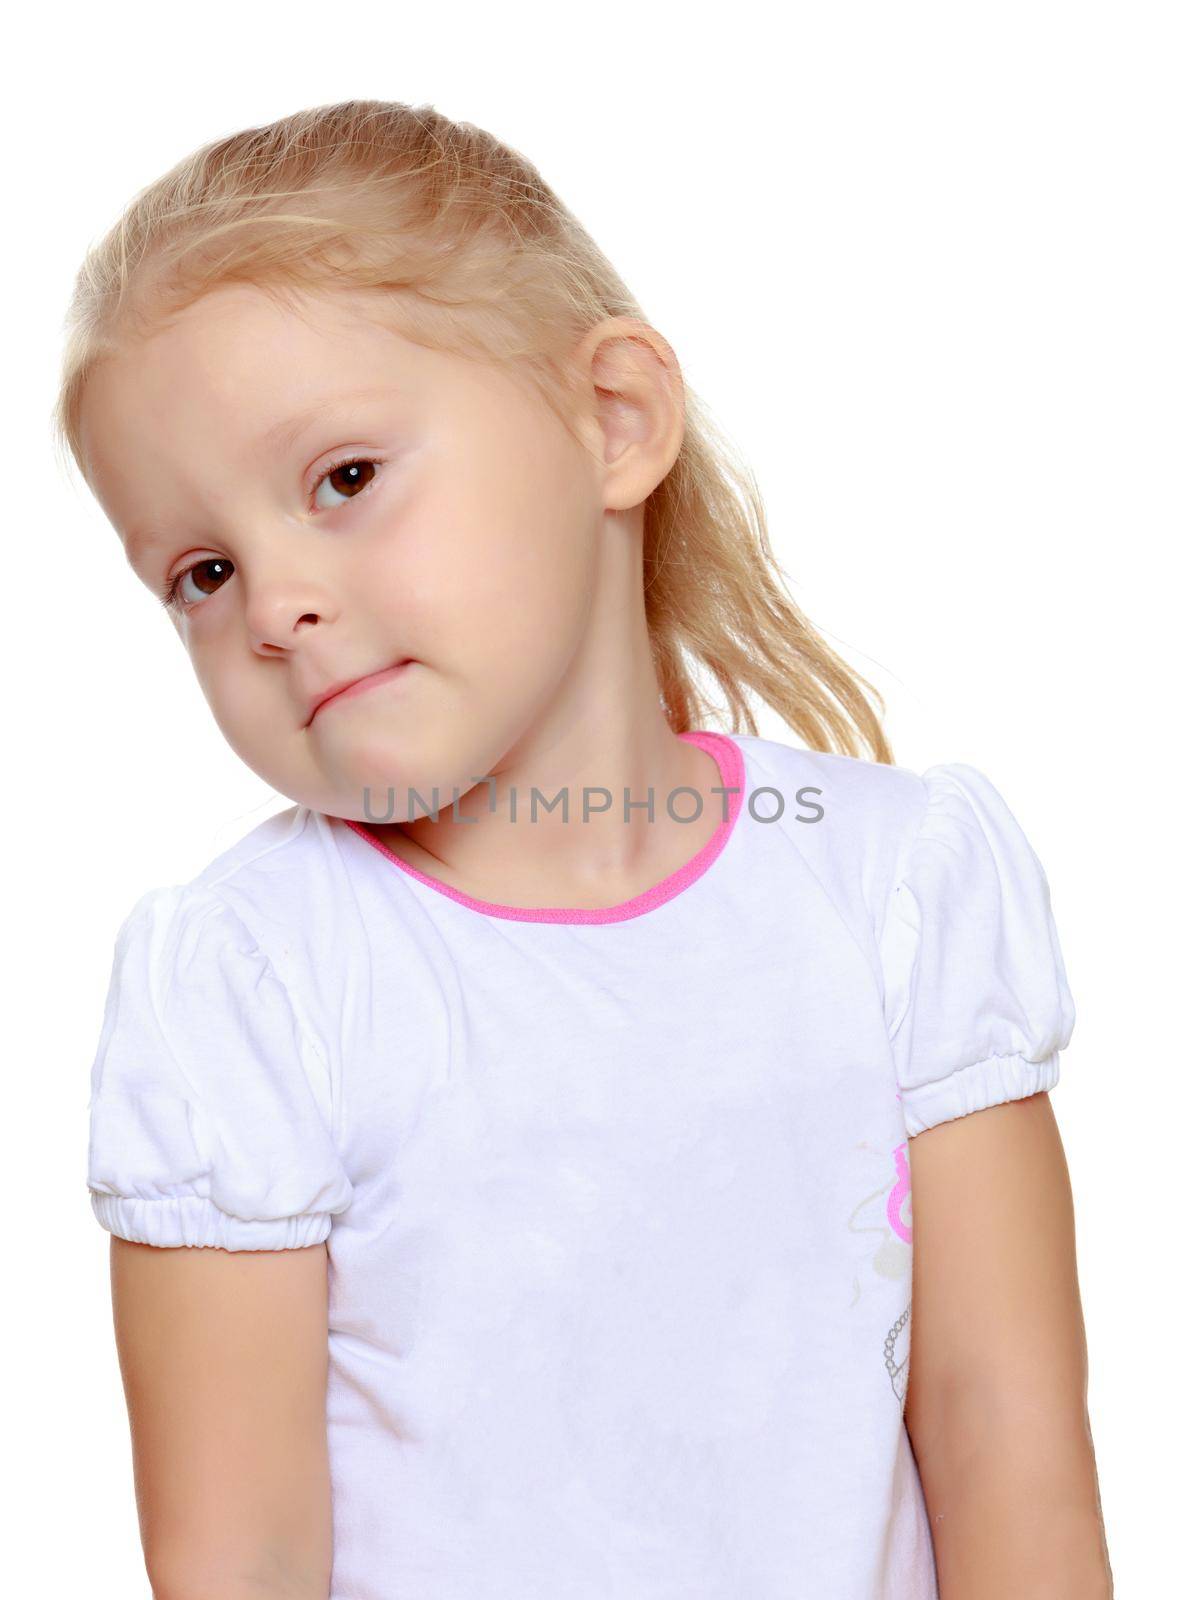 Cute little blond girl in white tank top without a pattern.Cute girl poses for the camera.Isolated on white background